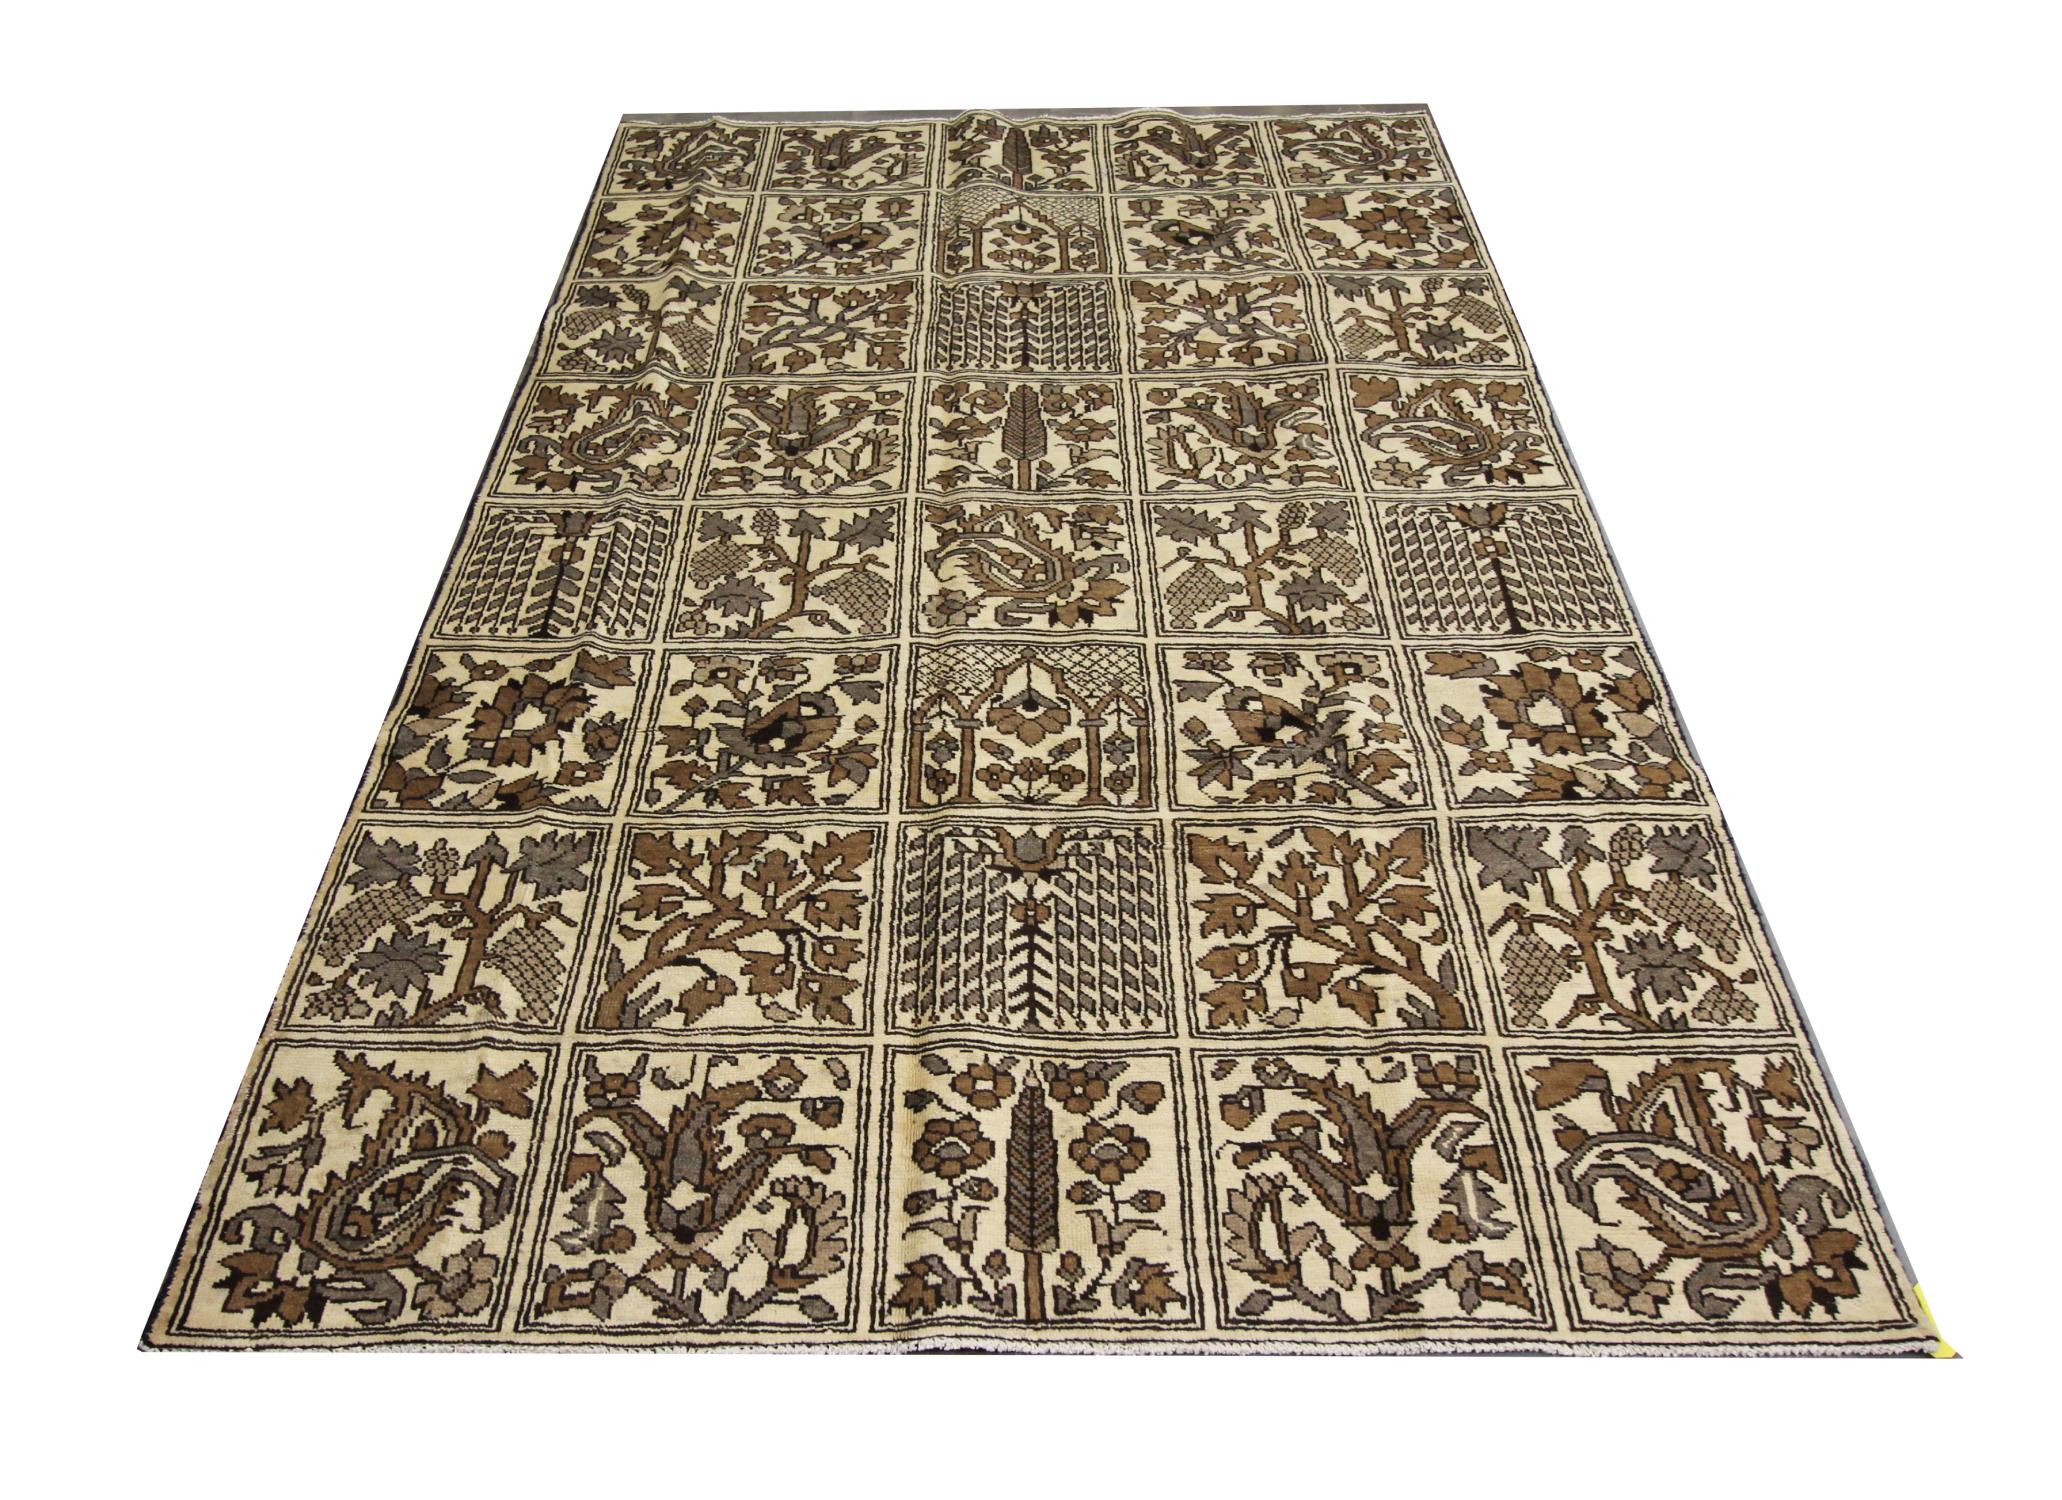 This large oriental carpet is a beautiful example of Turkish carpets woven in the early 20th century. The all-over design of this vintage rug has been woven on a rich beige field with oak brown, beige and accents that make up the decorative block of